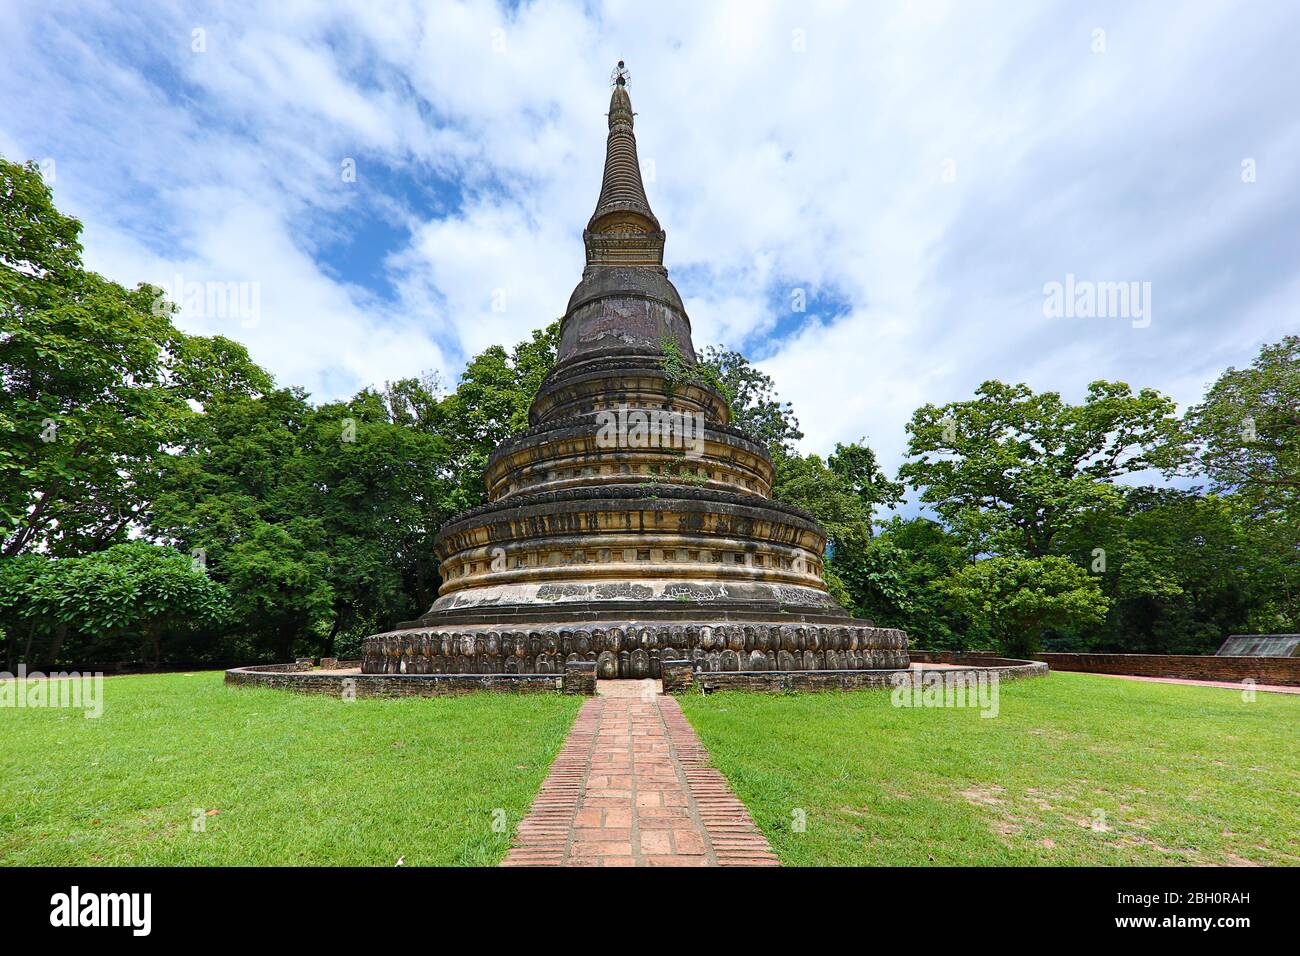 Wat Umong Buddhist Temple in Chiang Mai, Thailand Stock Photo